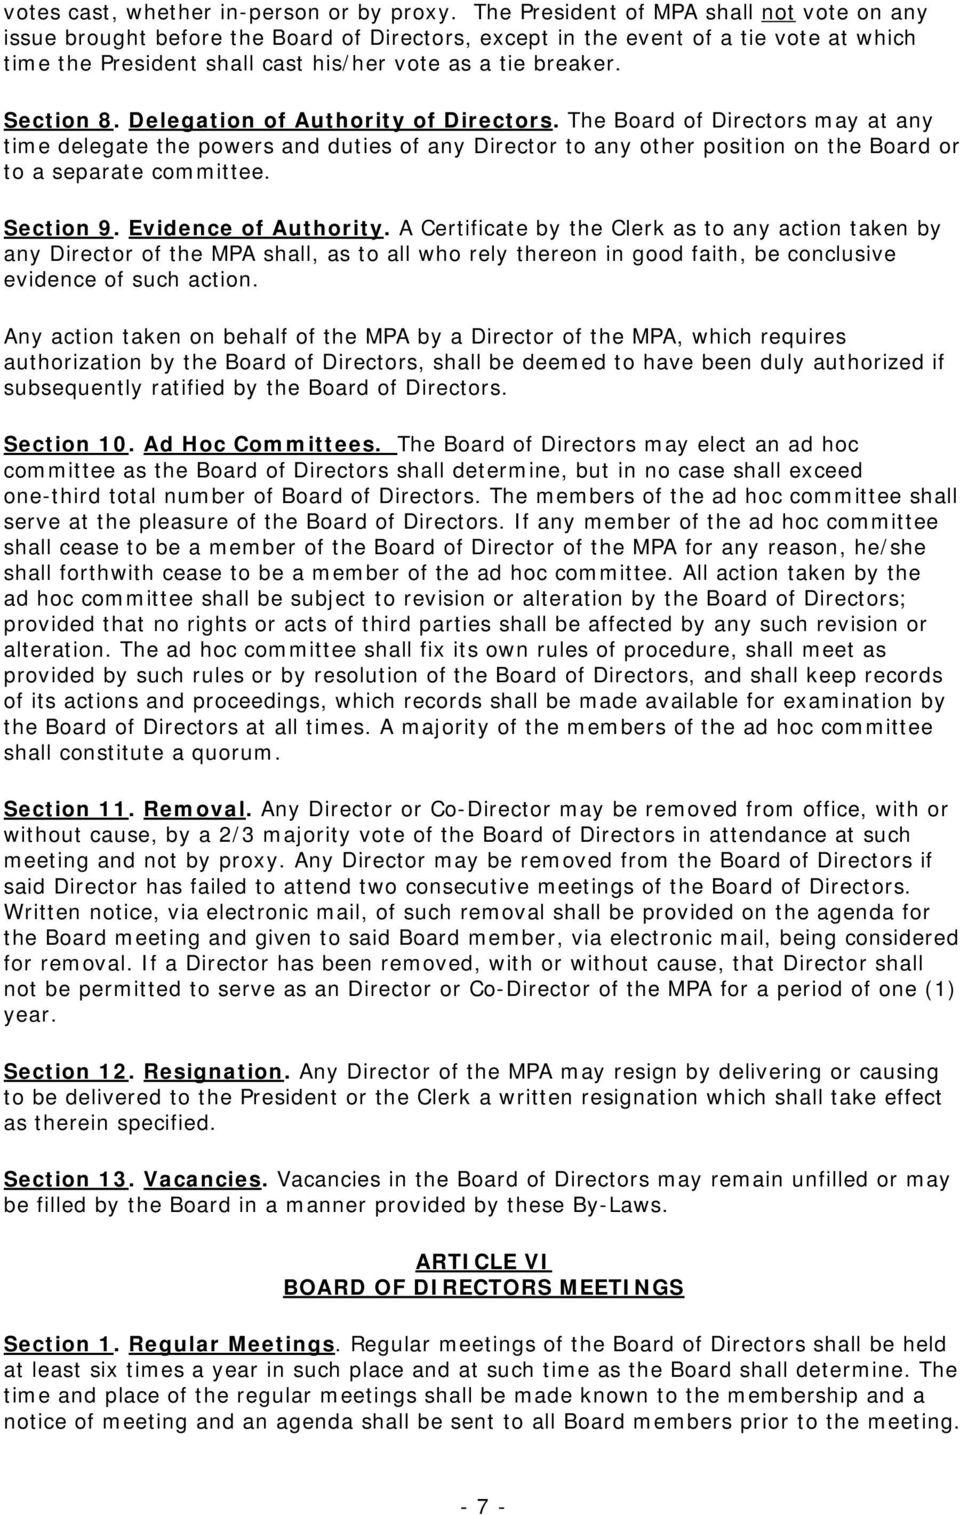 Section 8. Delegation of Authority of Directors. The Board of Directors may at any time delegate the powers and duties of any Director to any other position on the Board or to a separate committee.